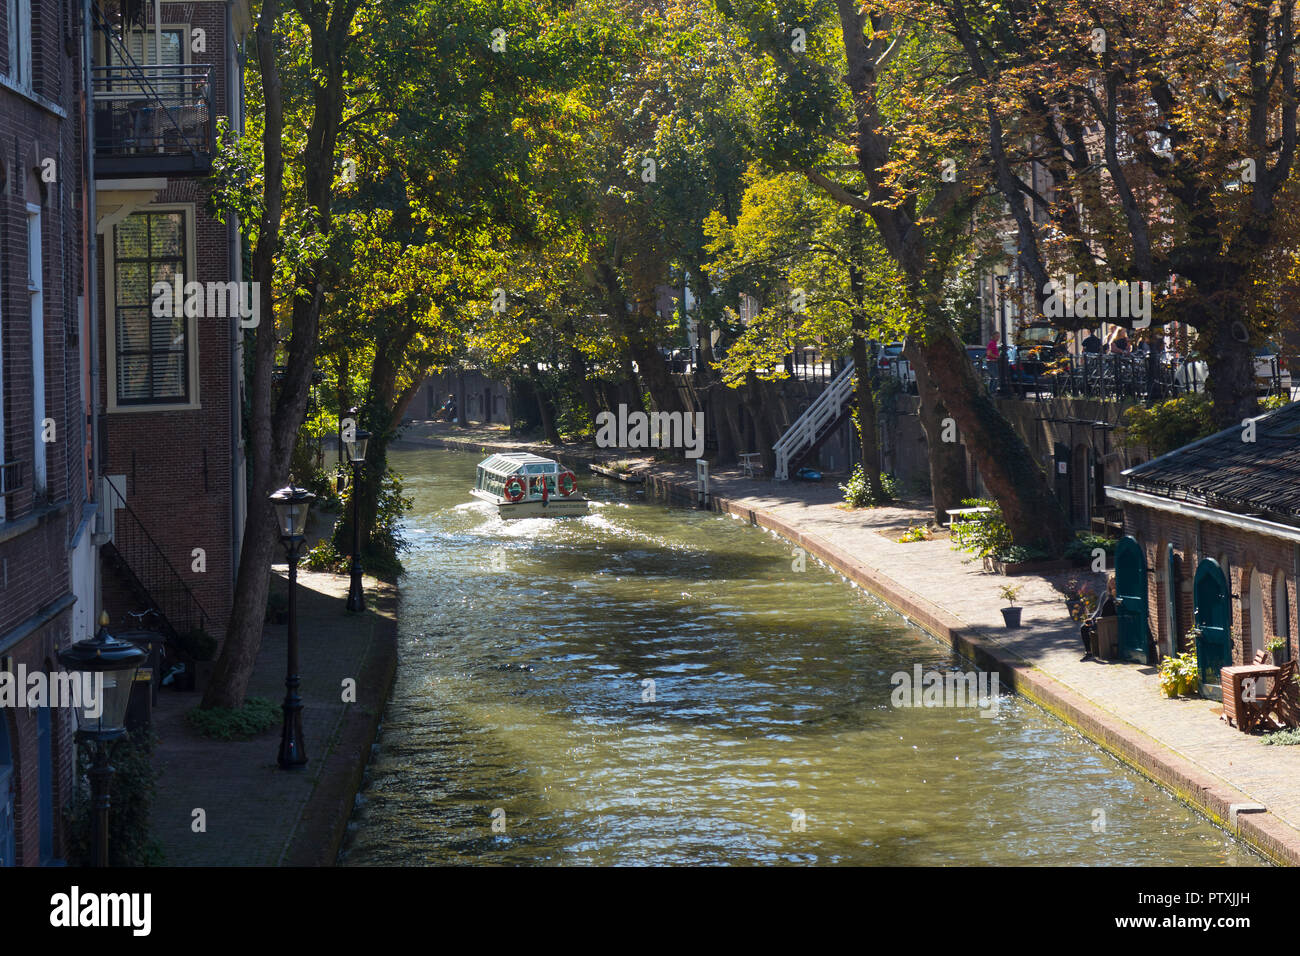 Utrecht, Netherlands - September 27, 2018:  Sightseeing boat in the canal in the historical center of Utrecht in autumn Stock Photo